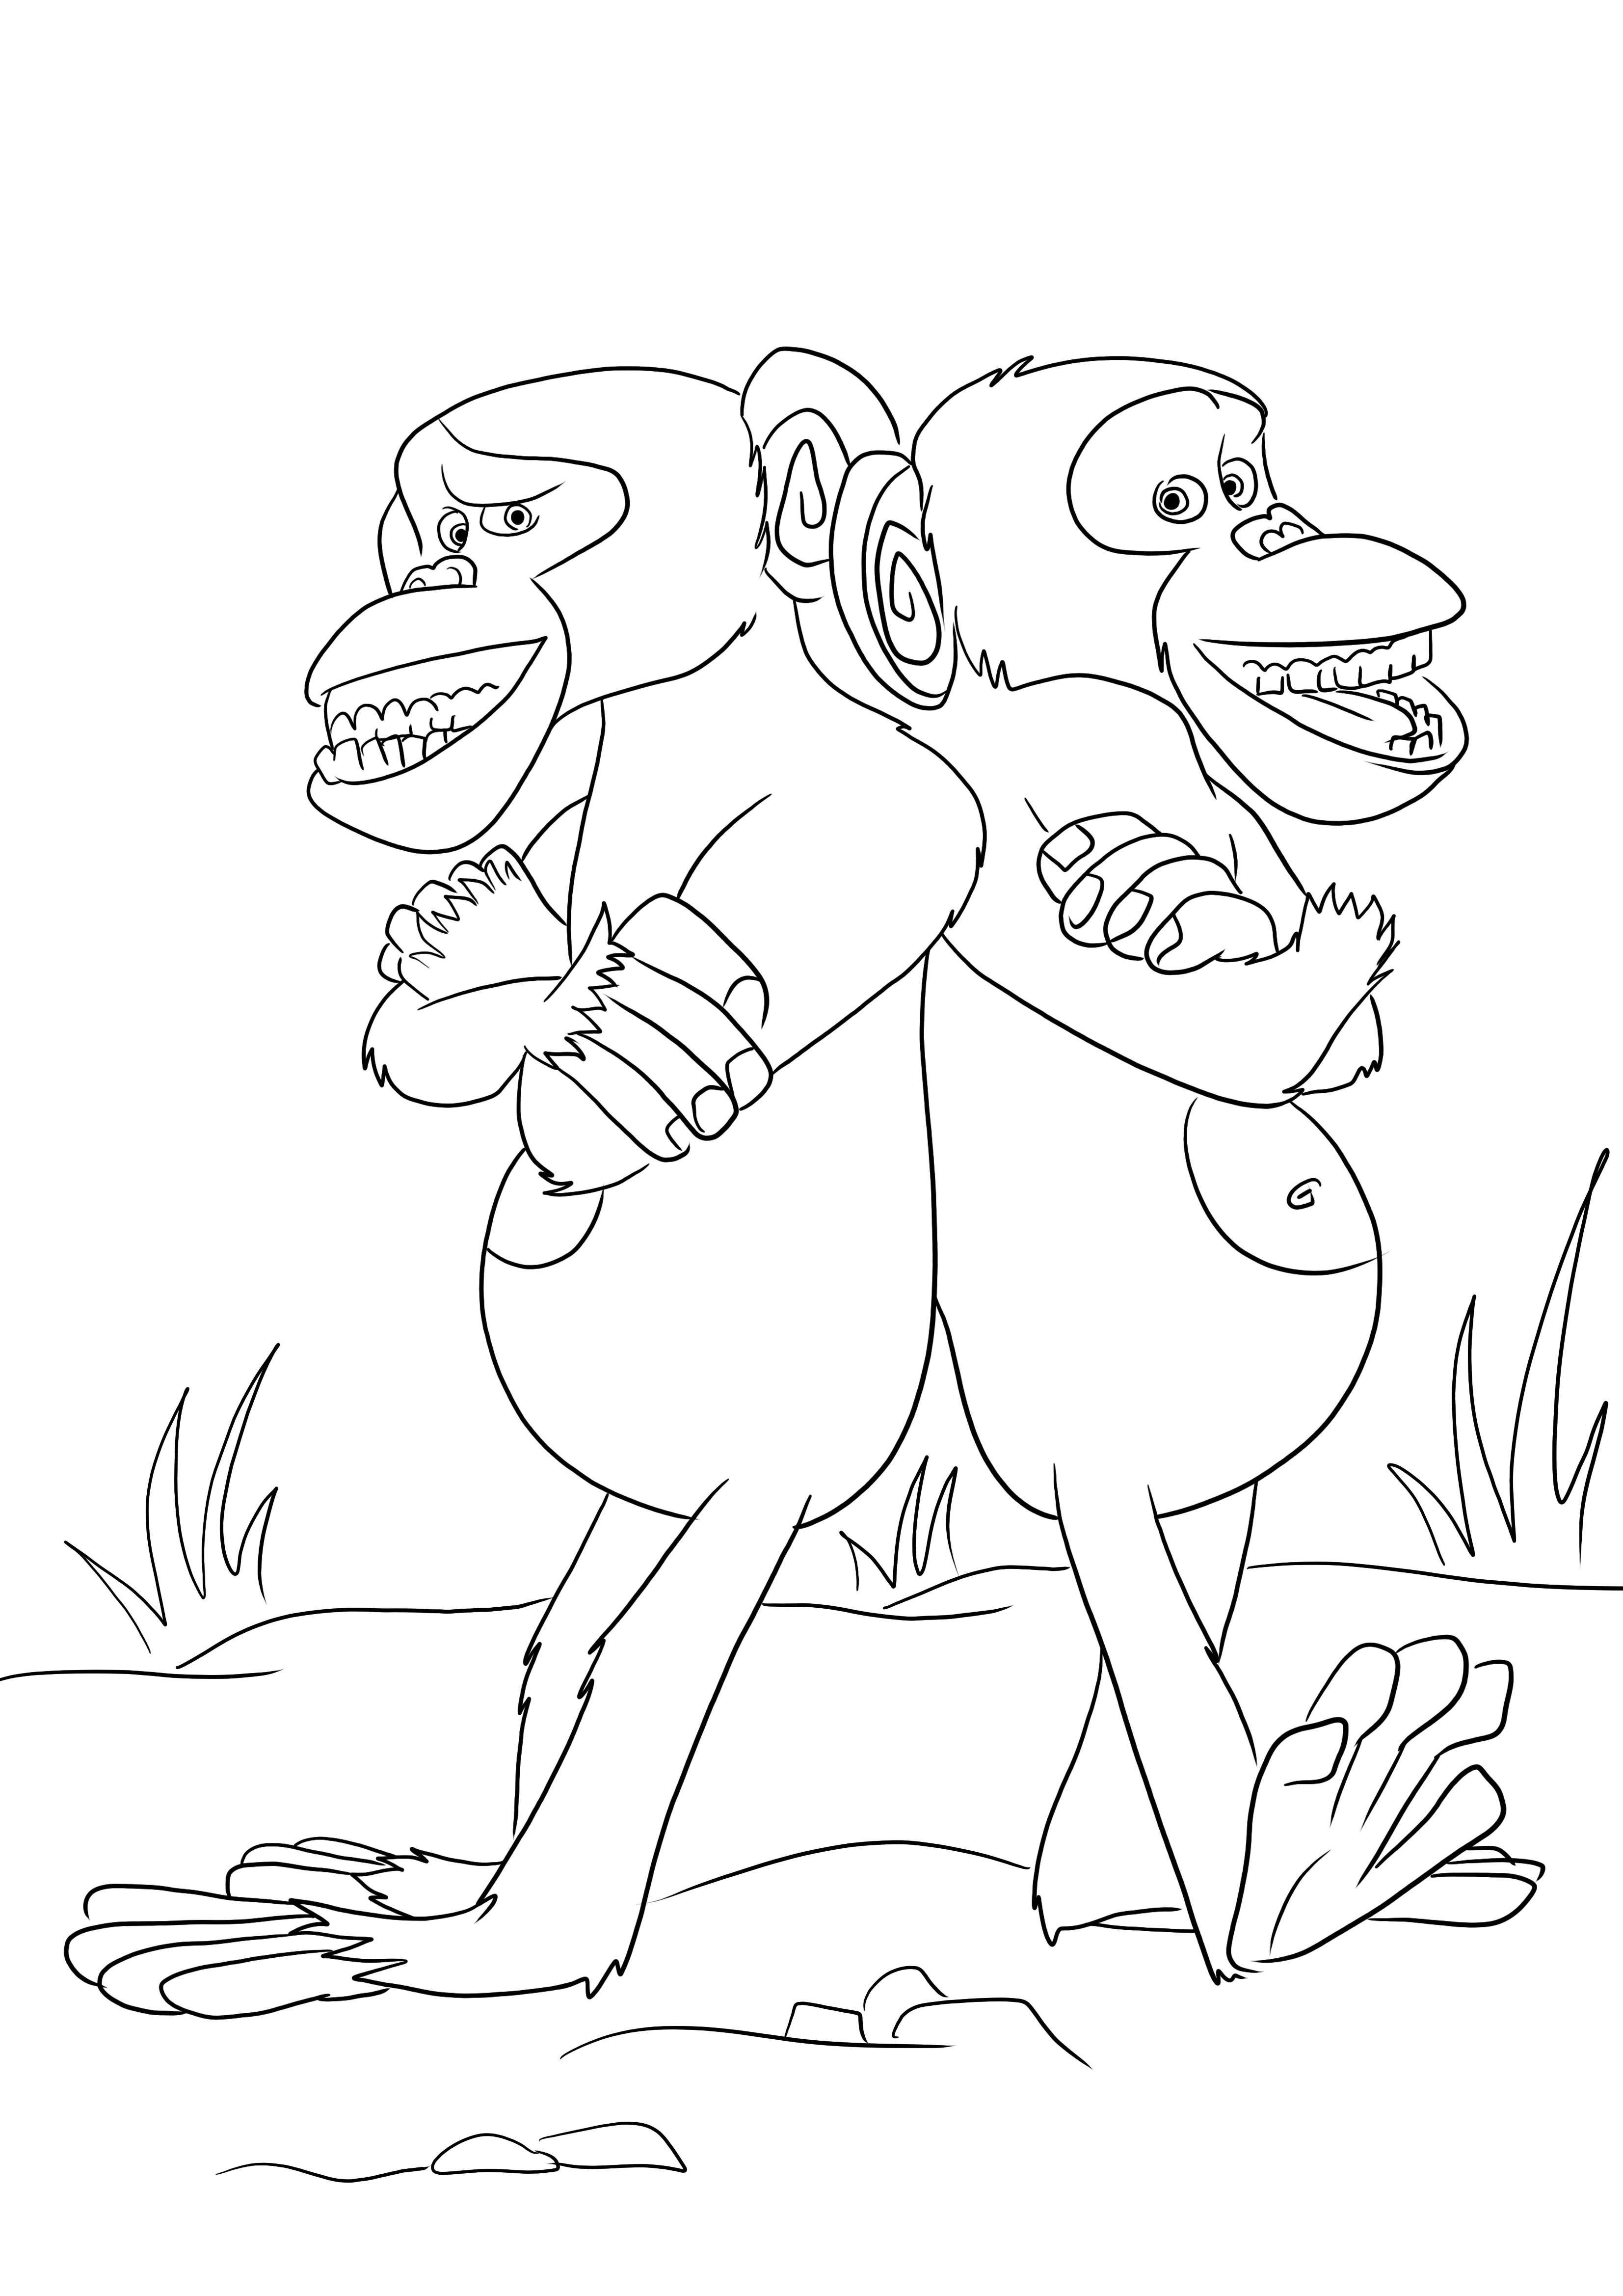 Mason and Phil-the two funny monkeys coloring image is free to be downloaded